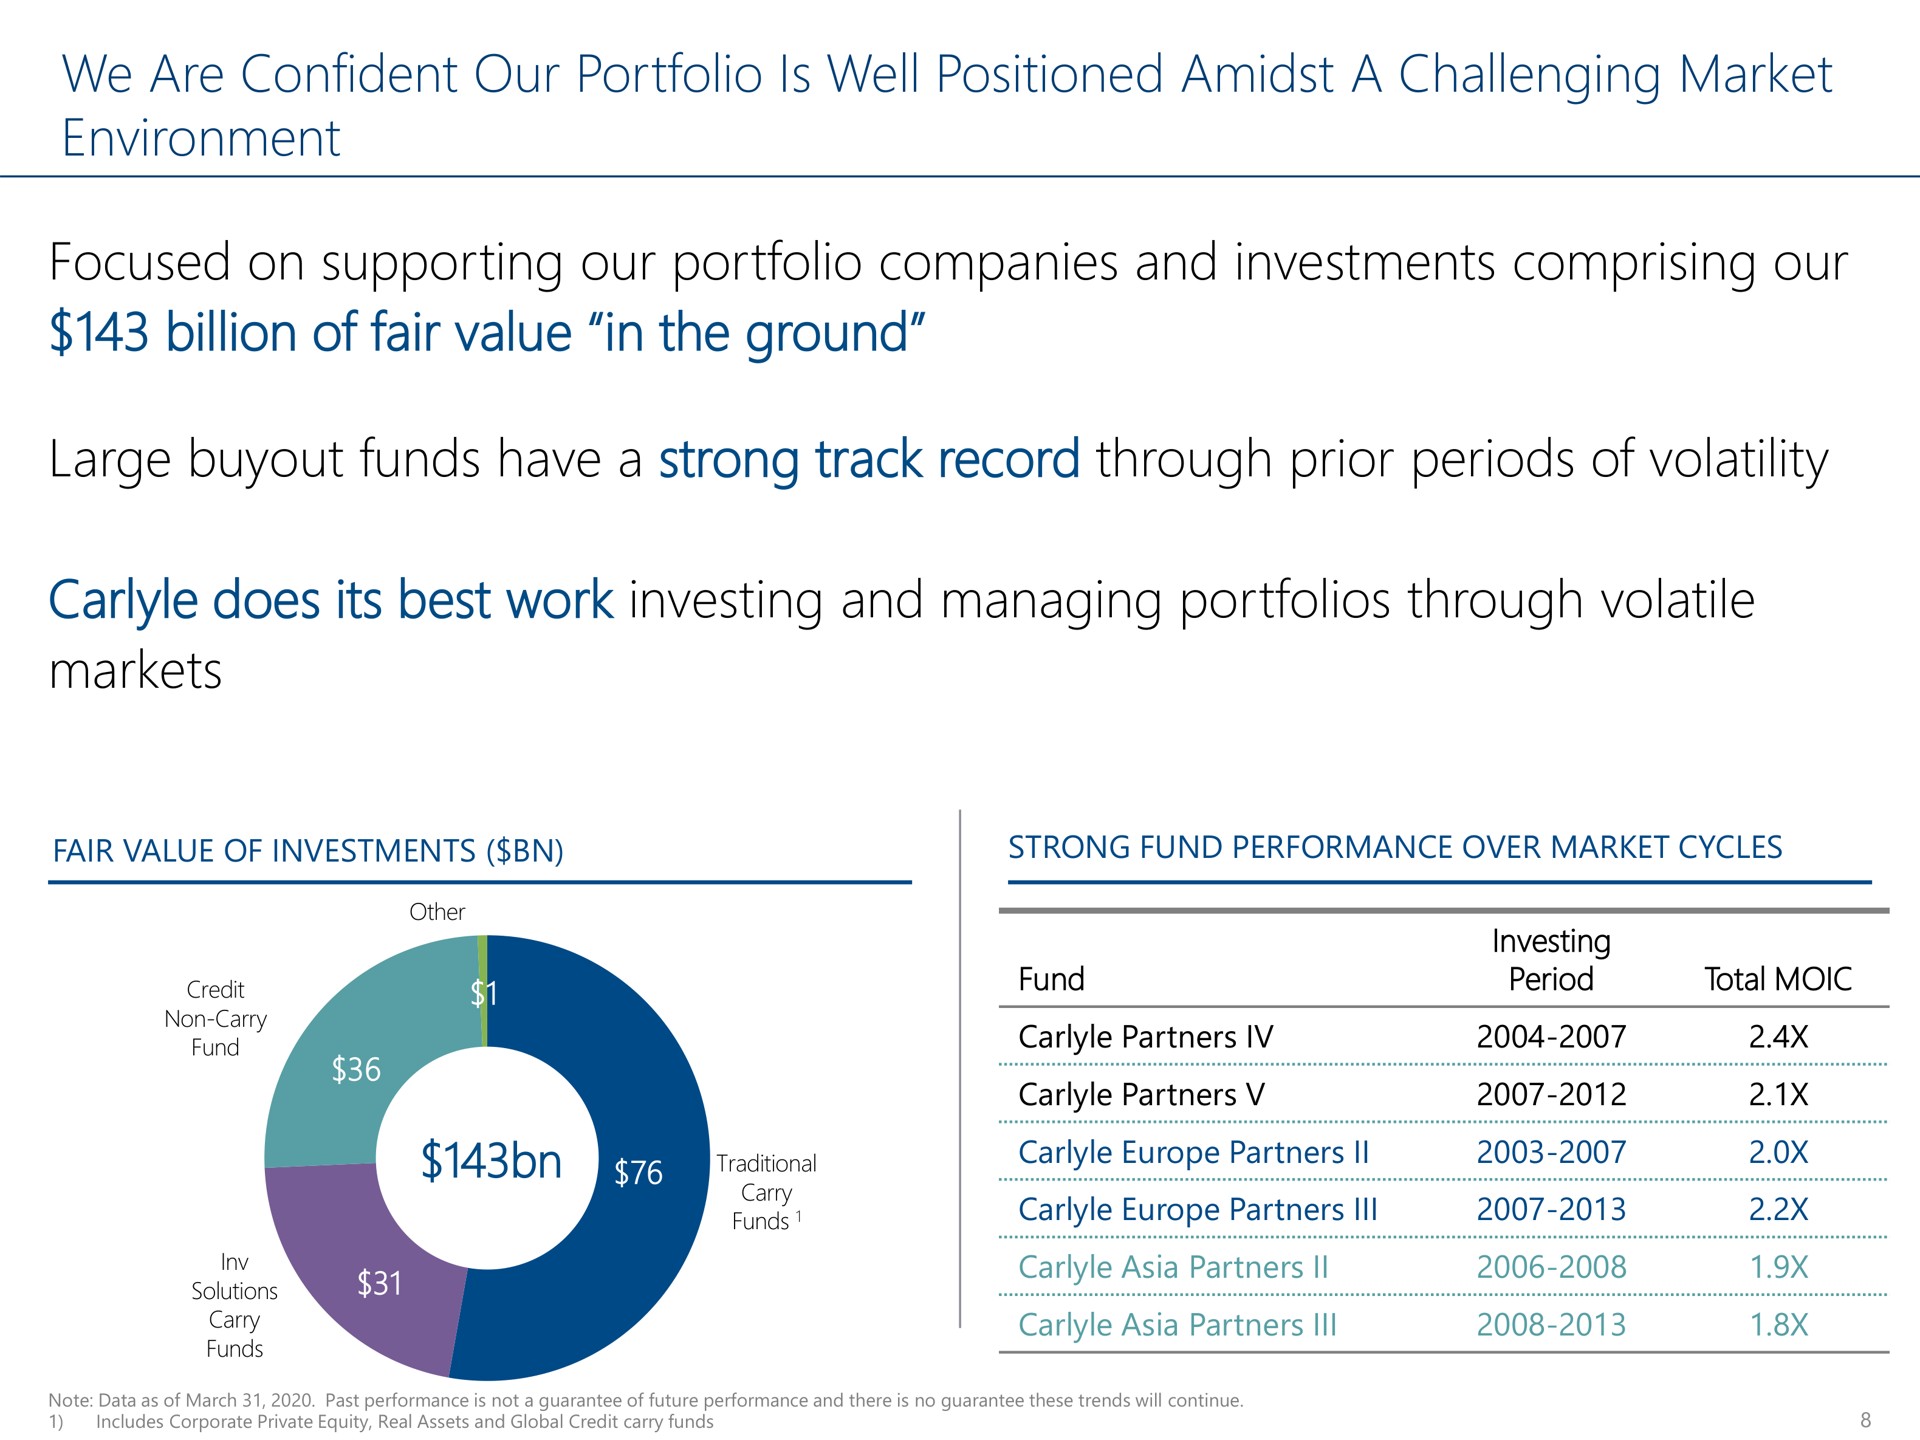 we are confident our portfolio is well positioned amidst a challenging market environment focused on supporting our portfolio companies and investments comprising our billion of fair value in the ground large funds have a strong track record through prior periods of volatility does its best work investing and managing portfolios through volatile markets partners | Carlyle